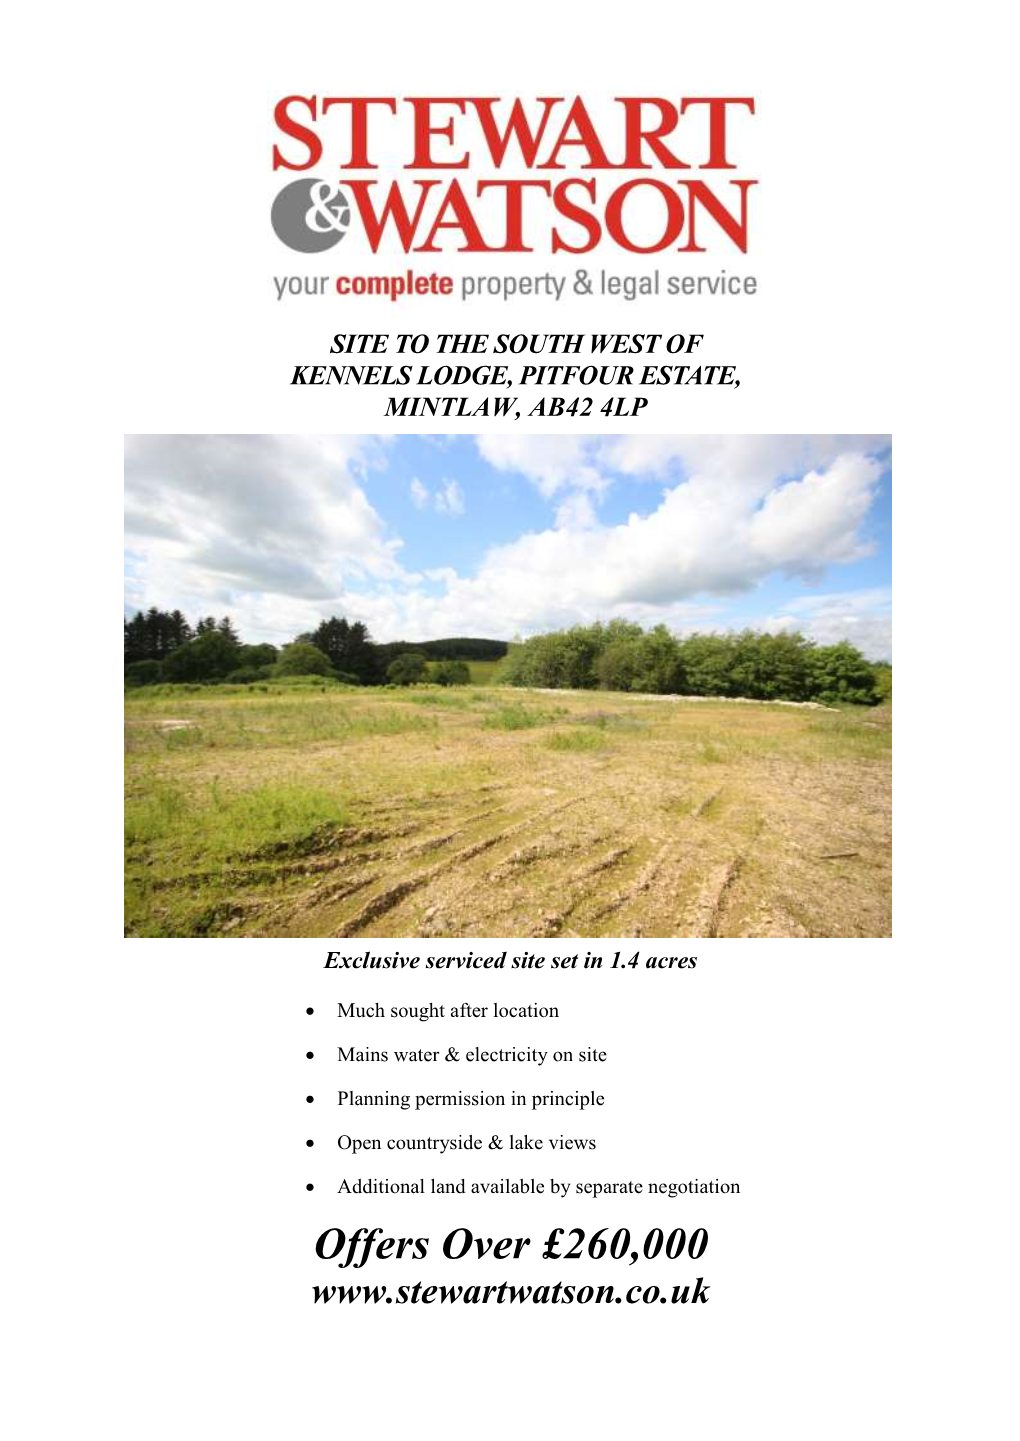 Site SW of Kennels Lodge, Pitfour, Mintlaw